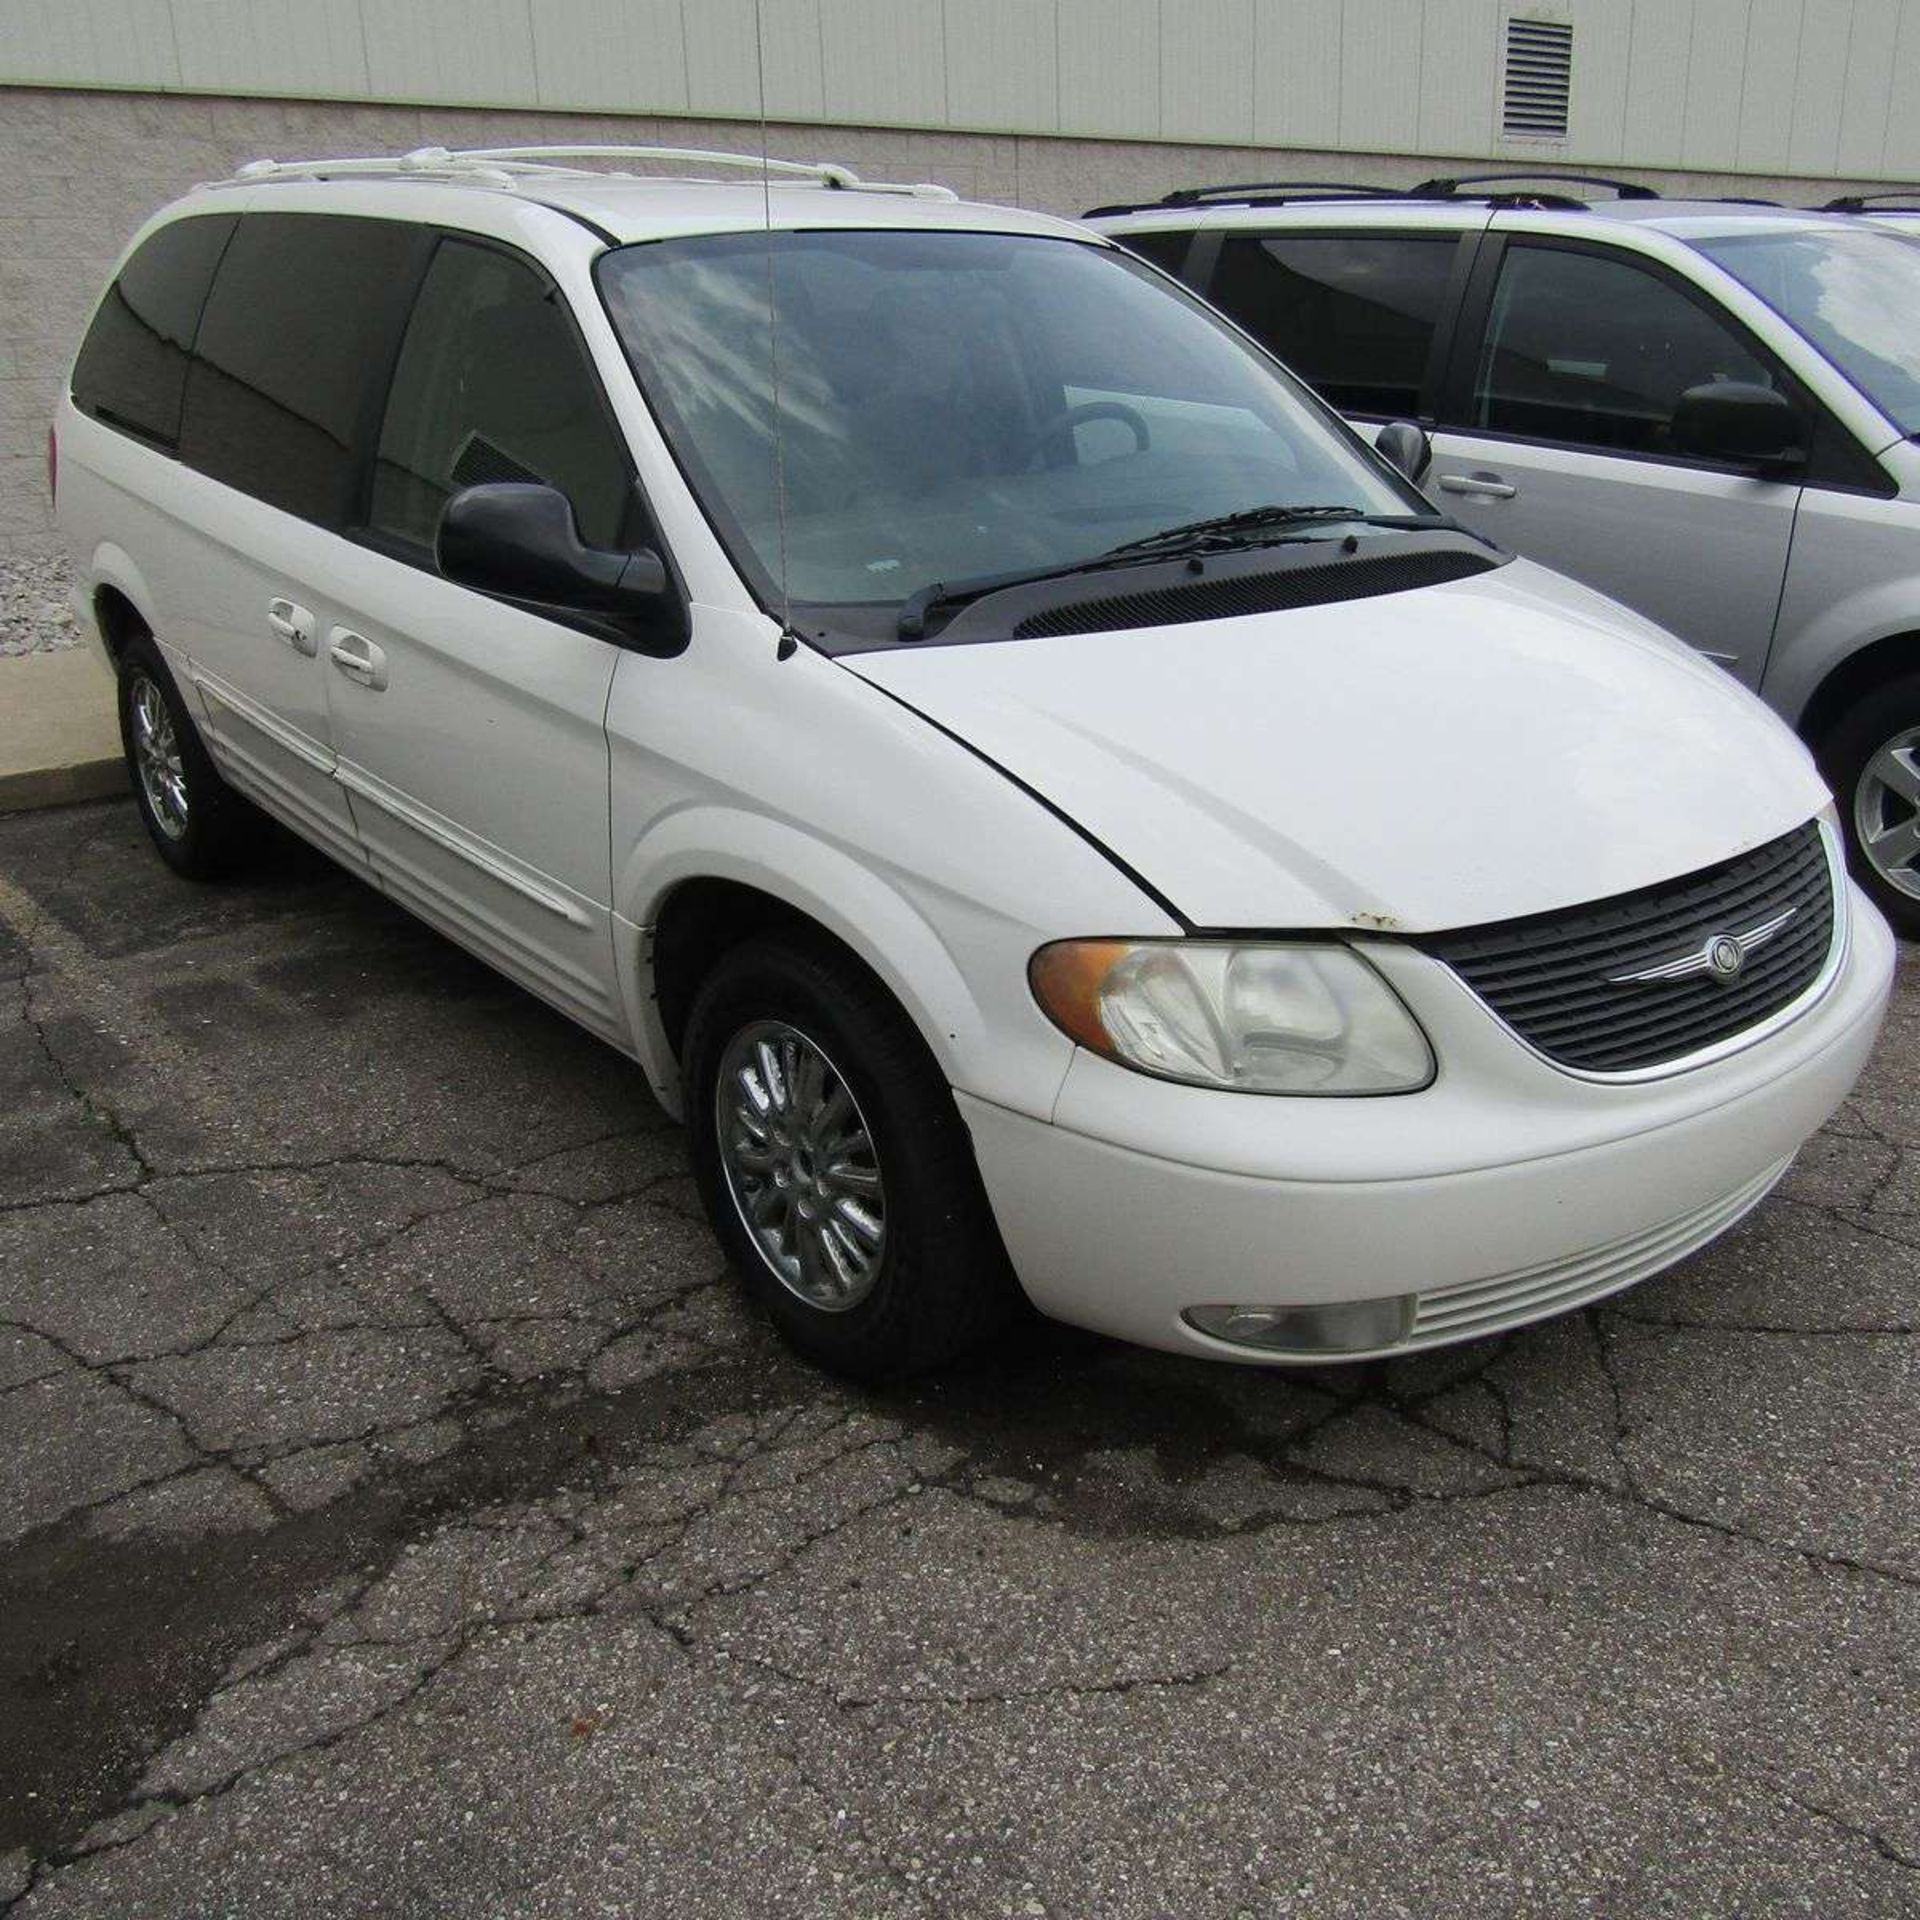 2003 Chrysler Town and Country Mini Van - Image 2 of 7